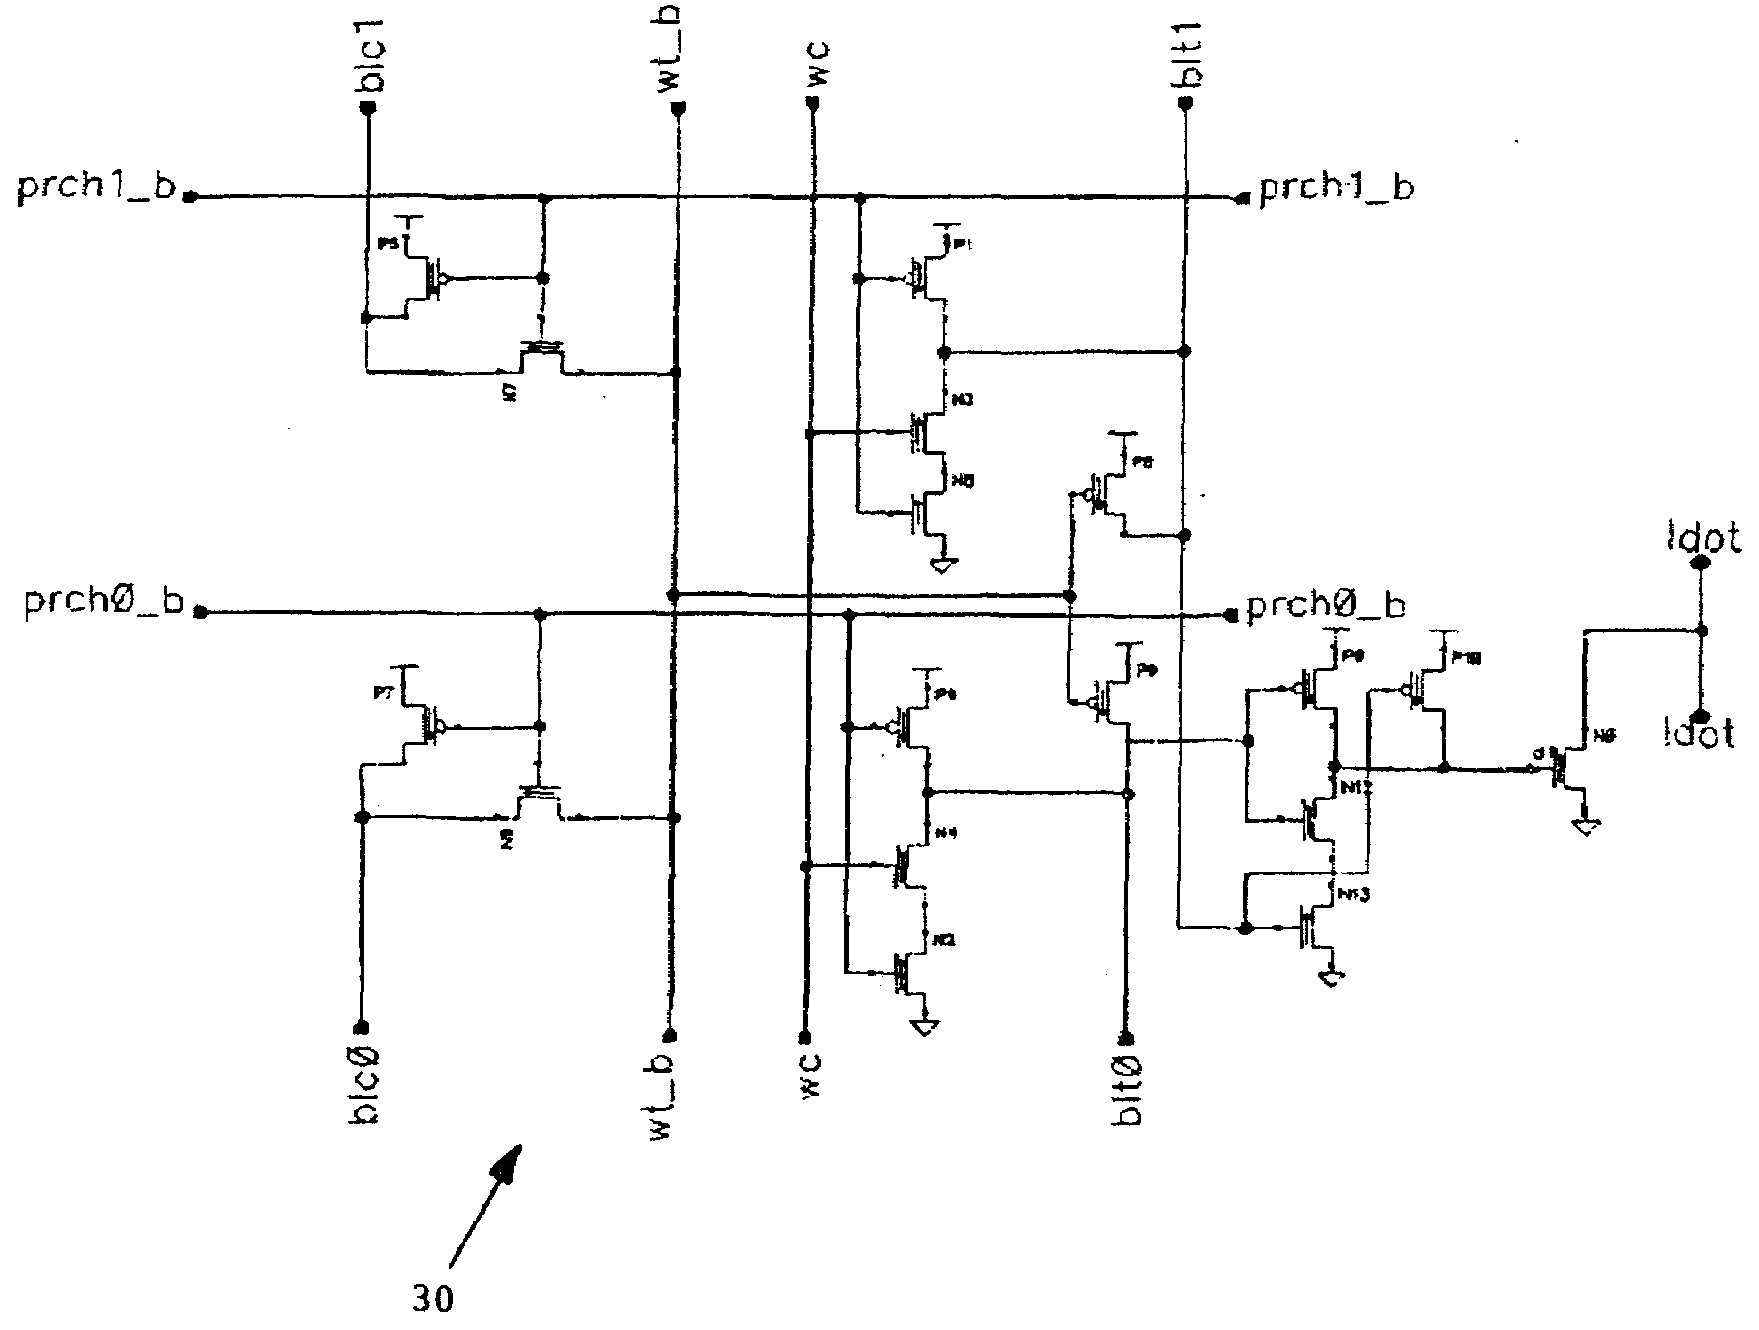 Method to improve performance of SRAM cells, SRAM cell, SRAM array, and write circuit